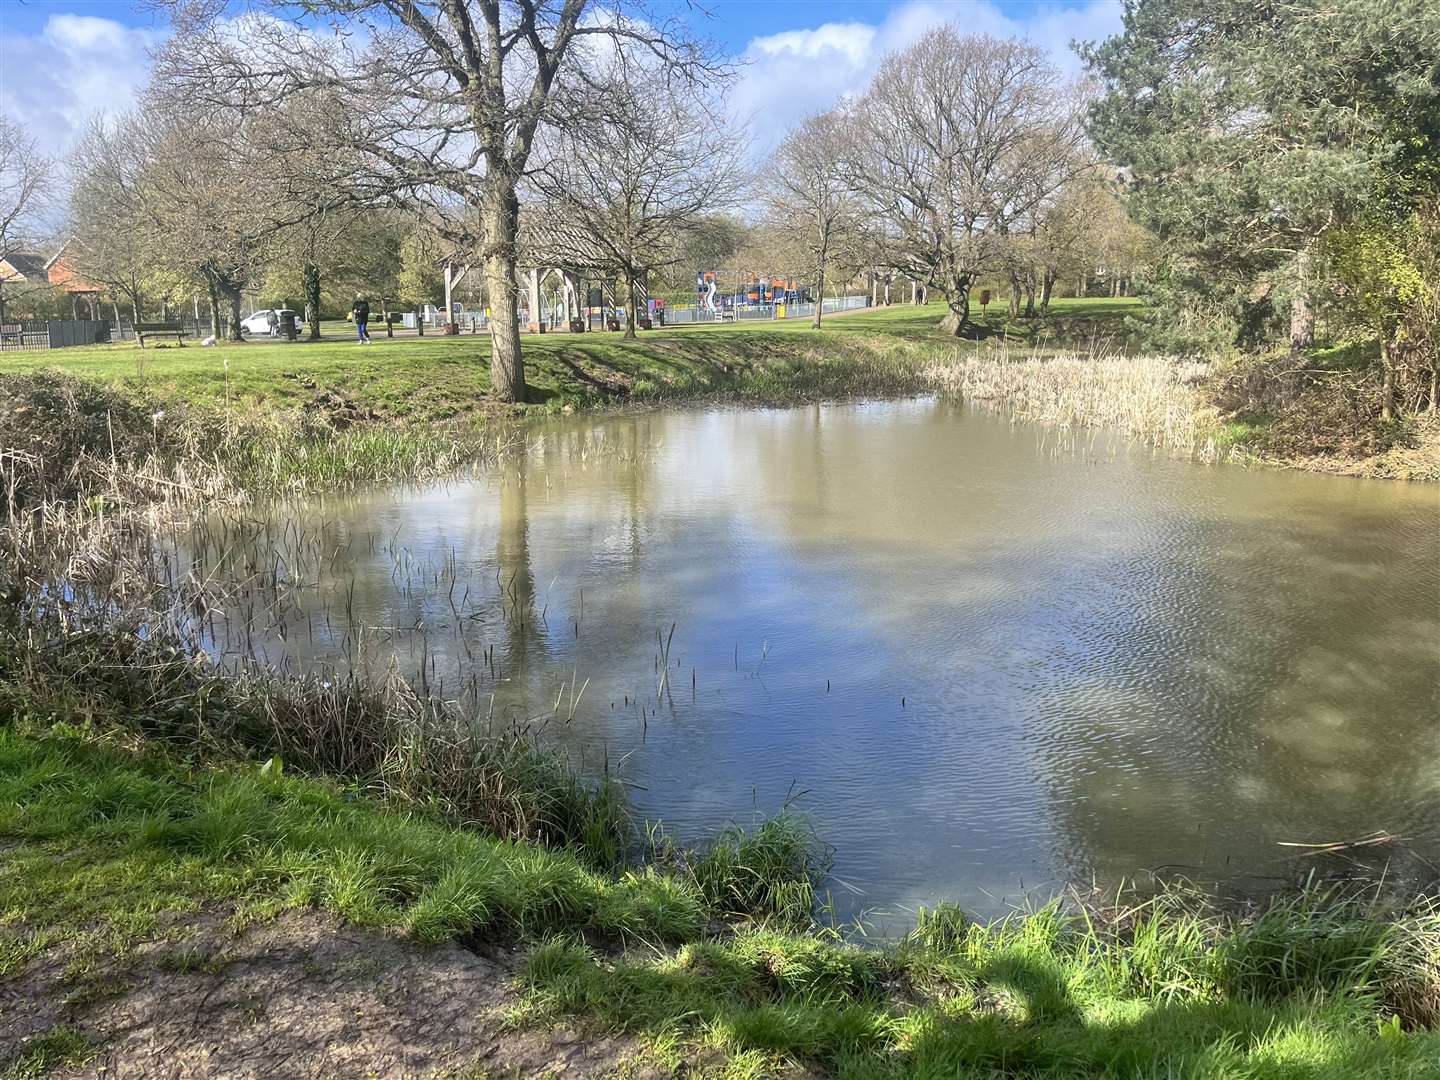 Fishing has now ended at the moat in Park Farm, Ashford